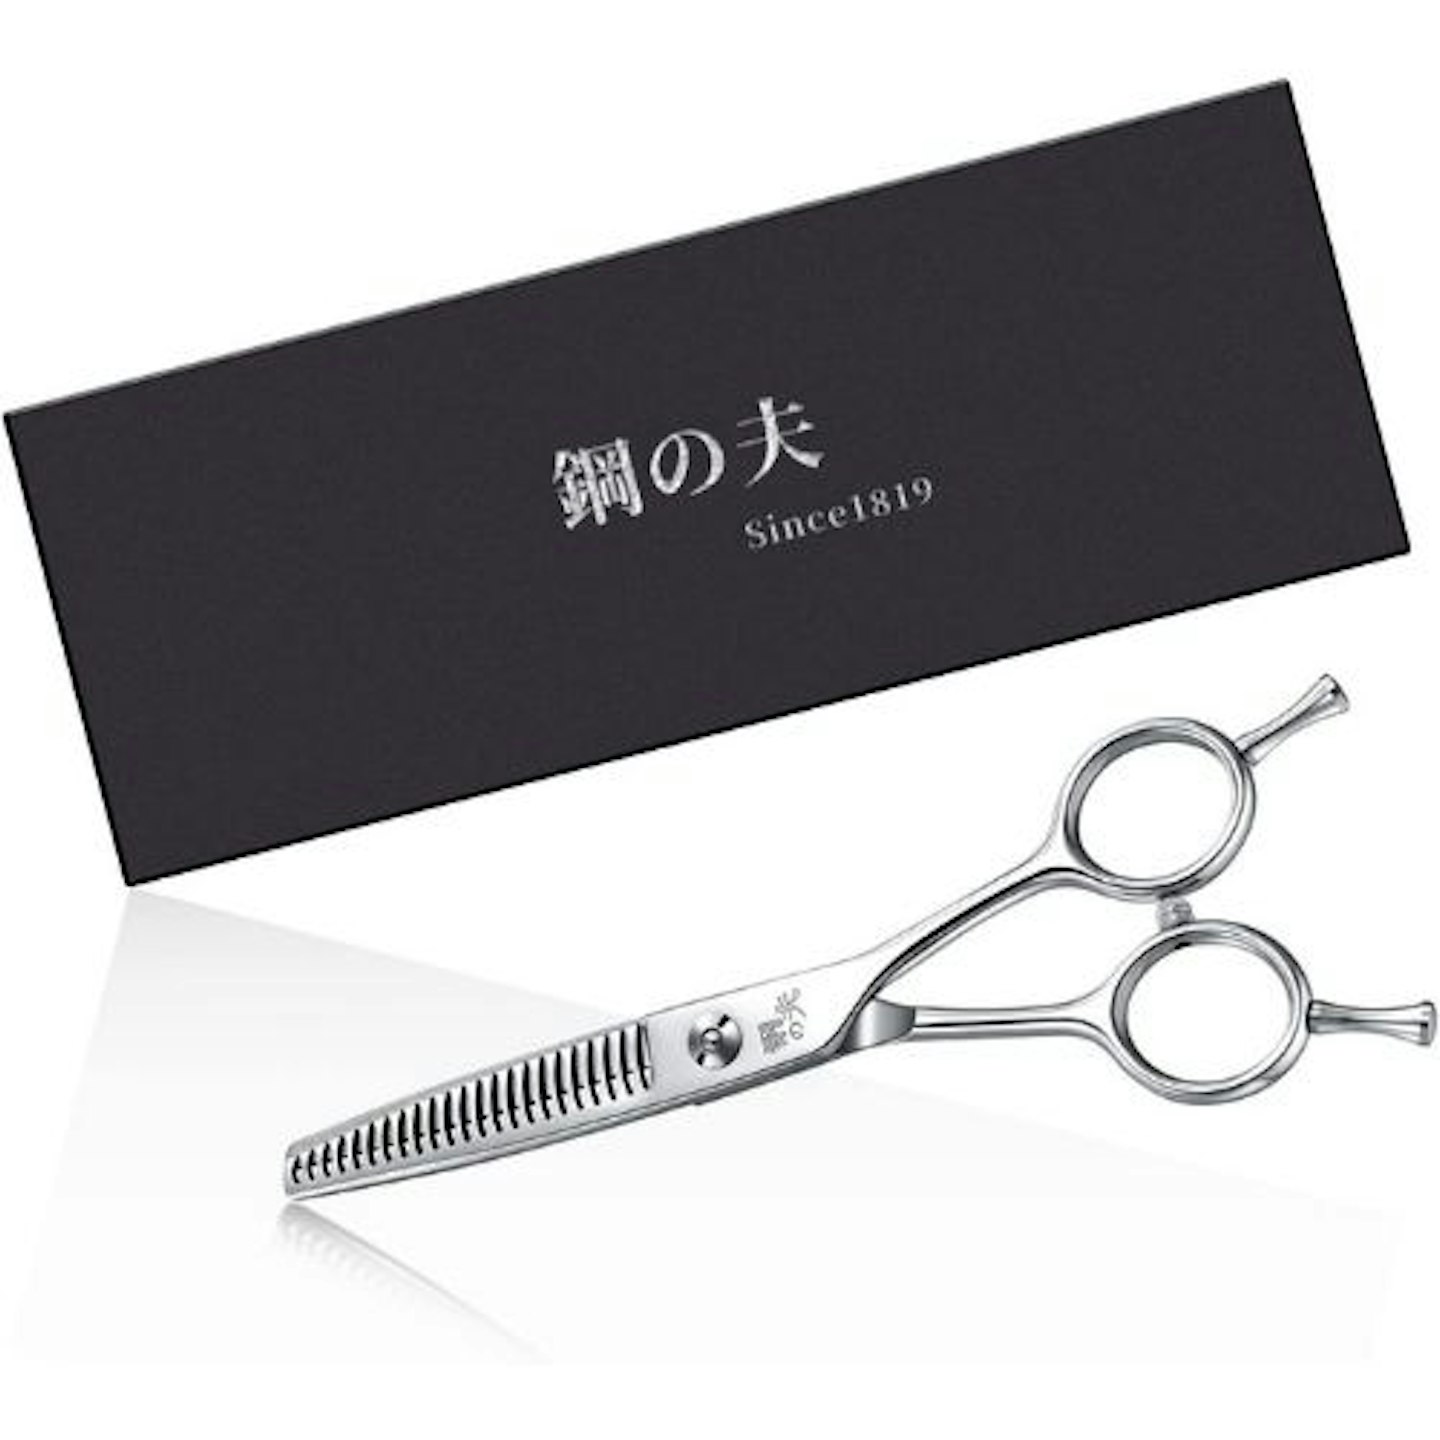 Professional 6 inch Japanese Stainless Steel Thinning Scissors 